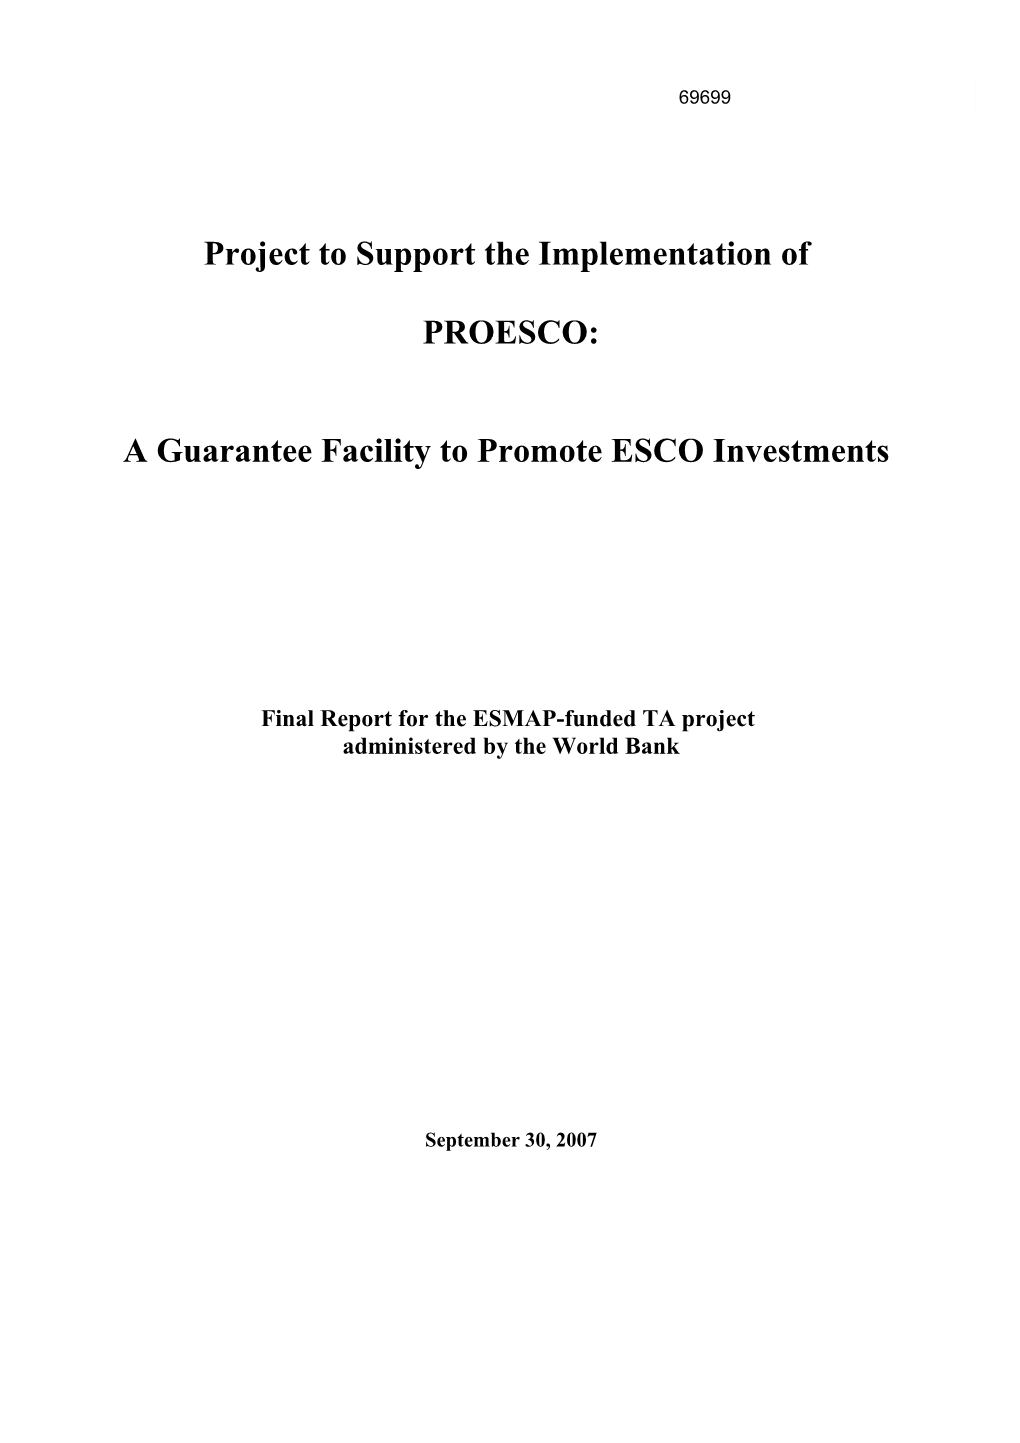 Project to Support the Implementation of PROESCO